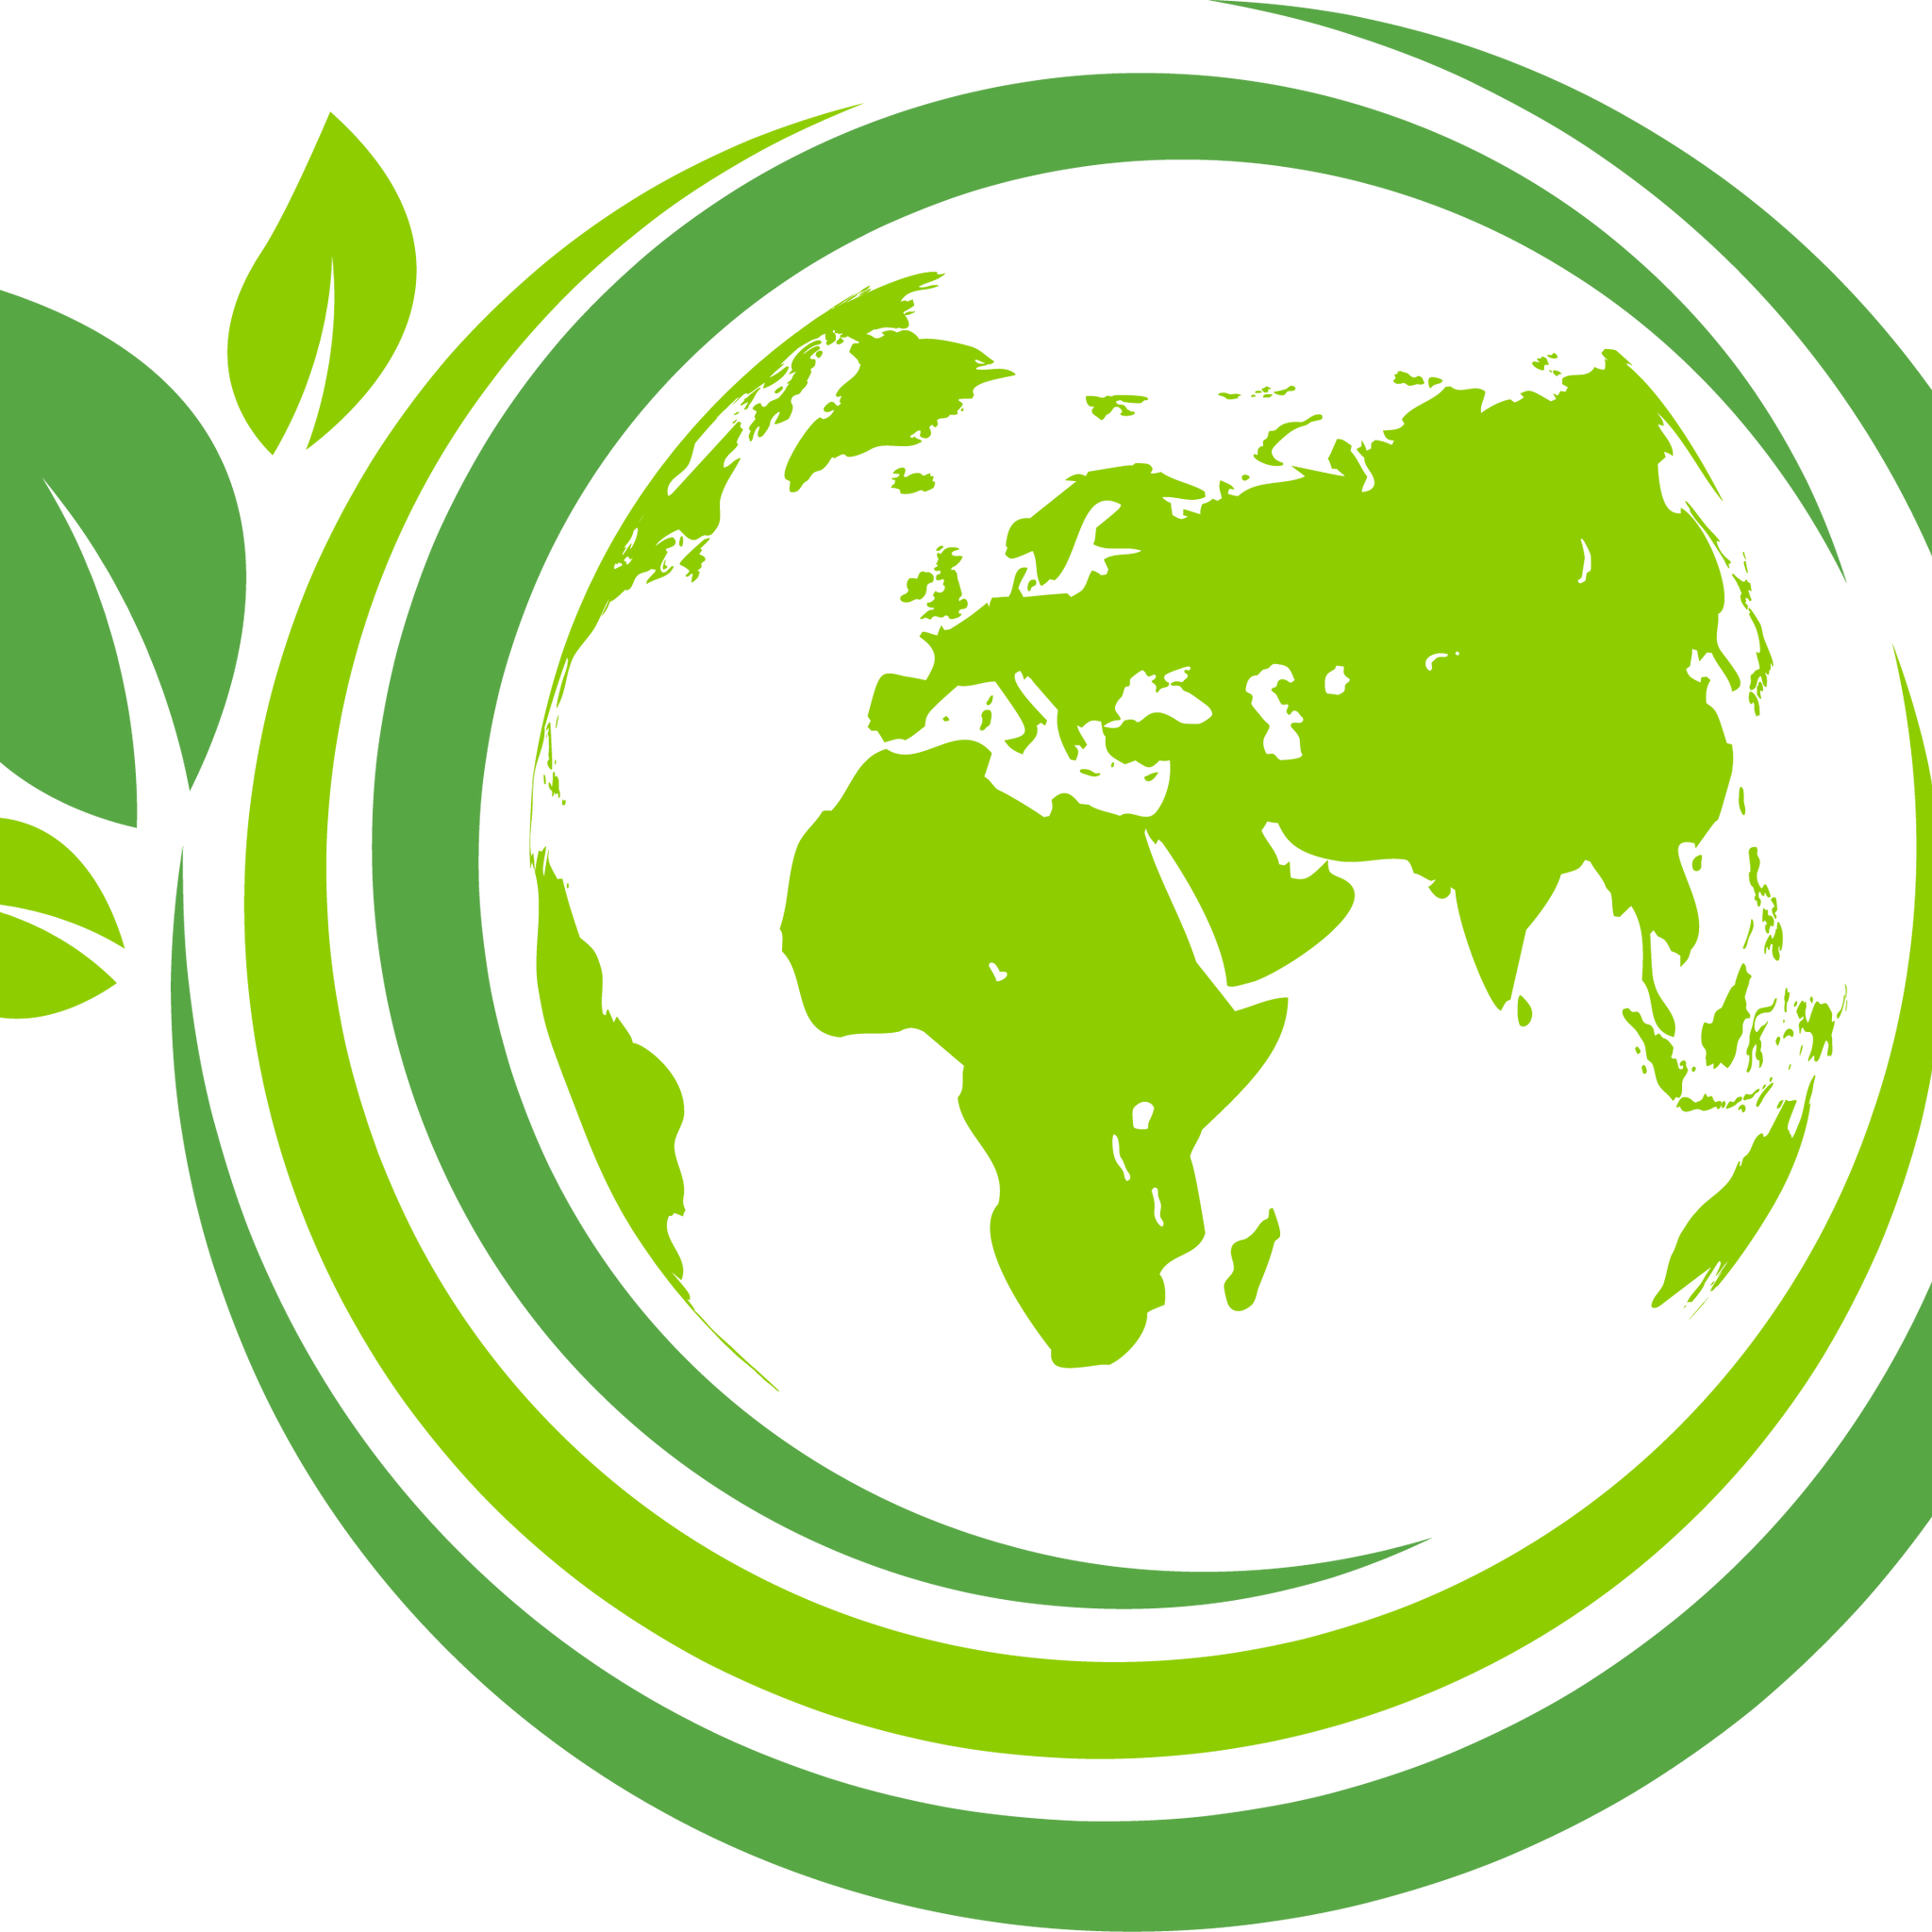 The world surrounded by green plants symbolizing conservation.